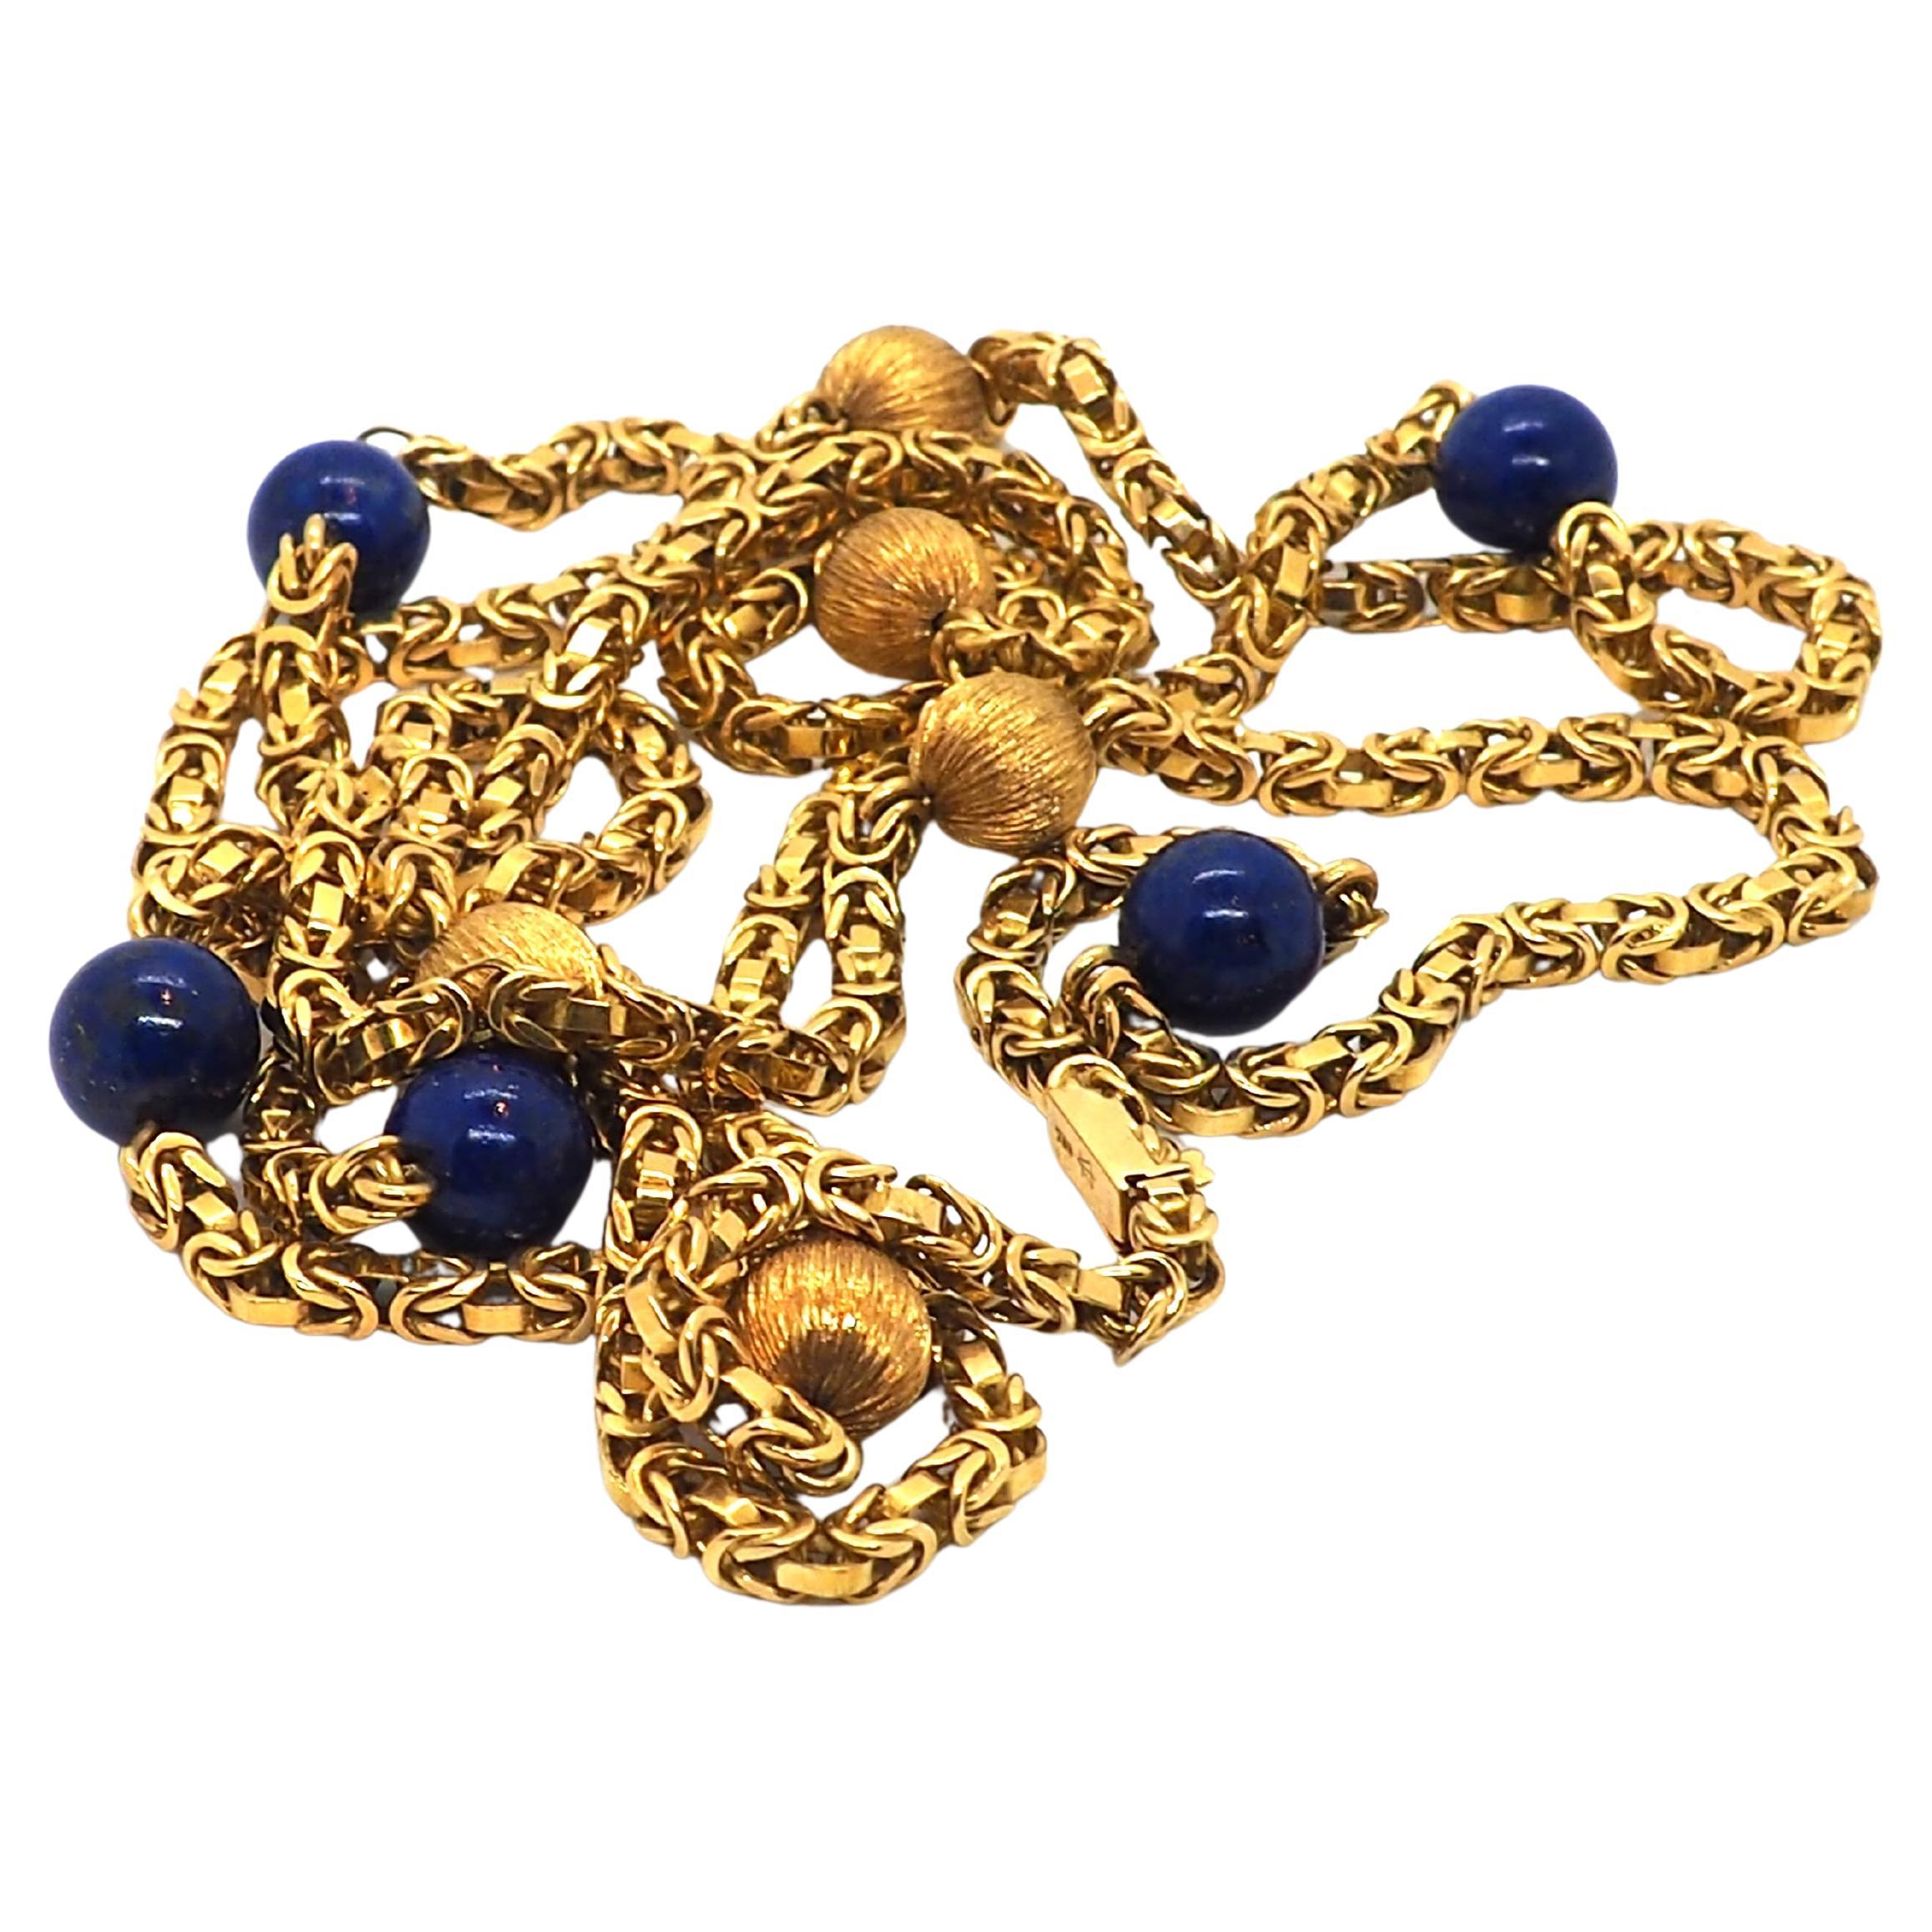 Vintage Art deco Necklace from 1950 made of yellow gold, decorated with 5 lapis lazuli balls and 5 more made of gold wit 9.35mm on a box type chain

Length 102 cm 
Total weight 80.2g

All our pieces have been carefully chosen, restored and prepared